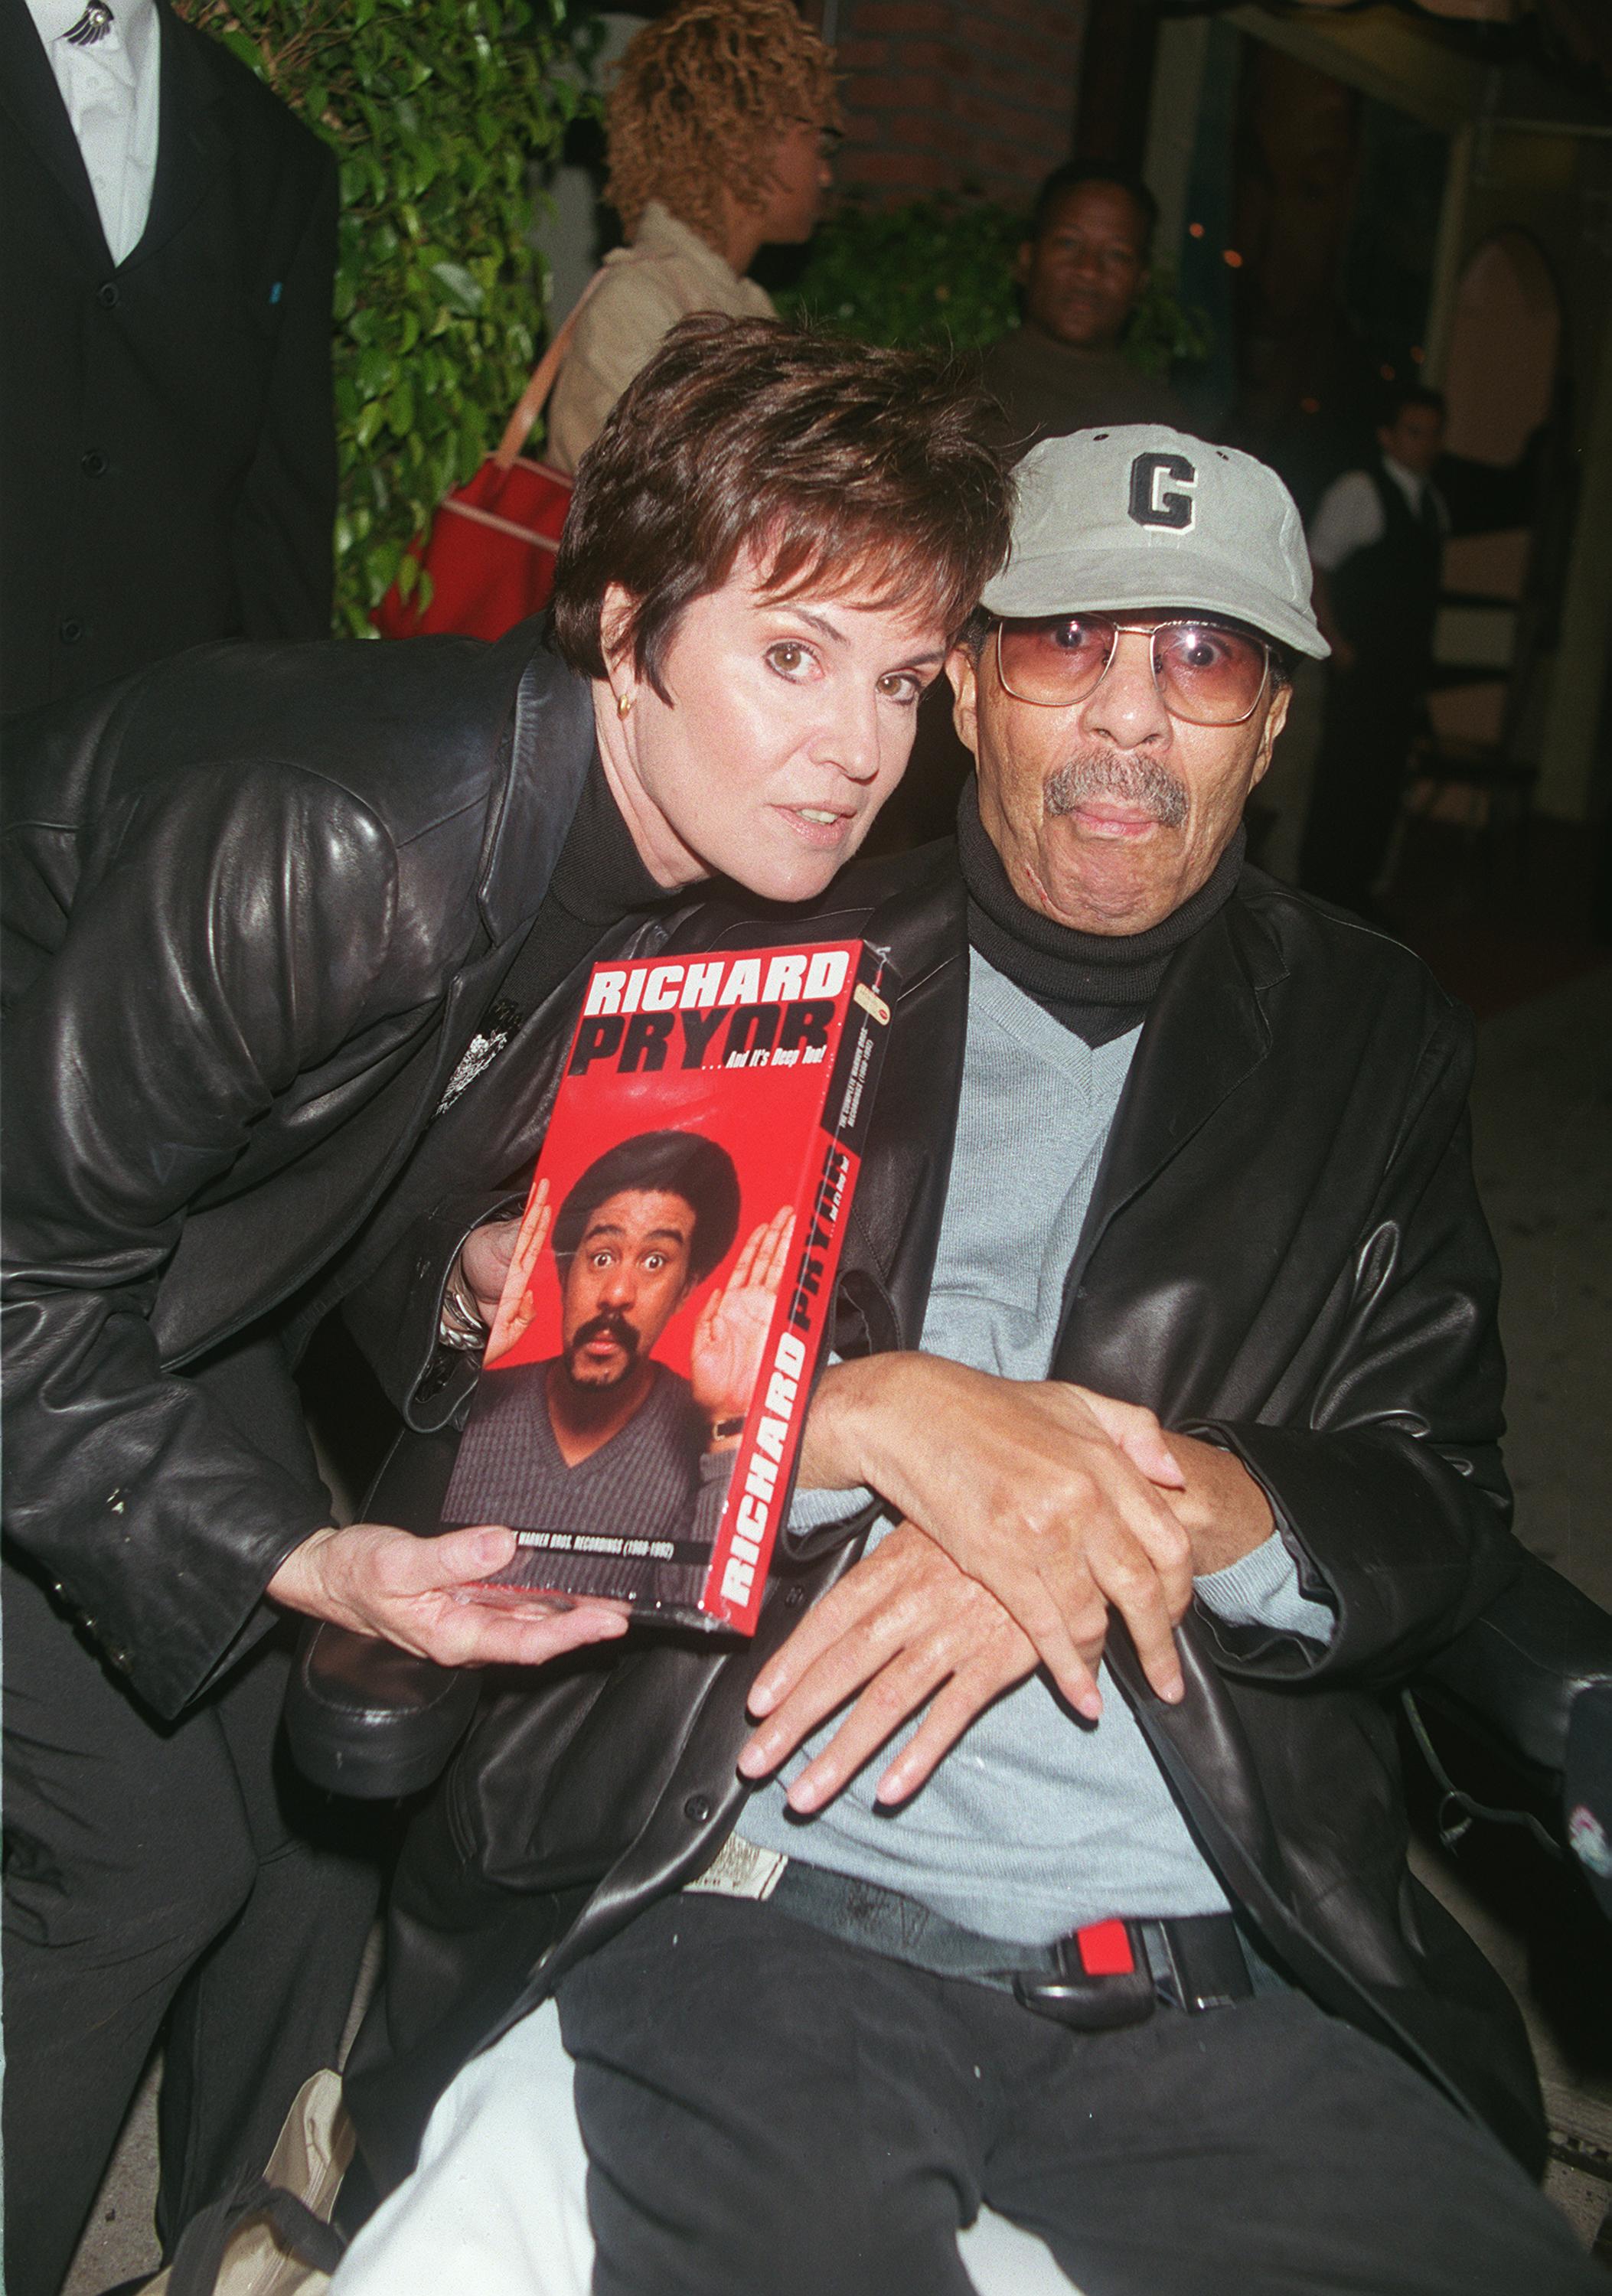 Comedian Richard Pryor and producer Jennifer Lee pose for the photographer at the Laugh Factory comedy club to promote Pryor's 9 box CD of "Richard Pryor...And It's Deep Too!" October 25, 2000 in Hollywood, CA | Getty Images